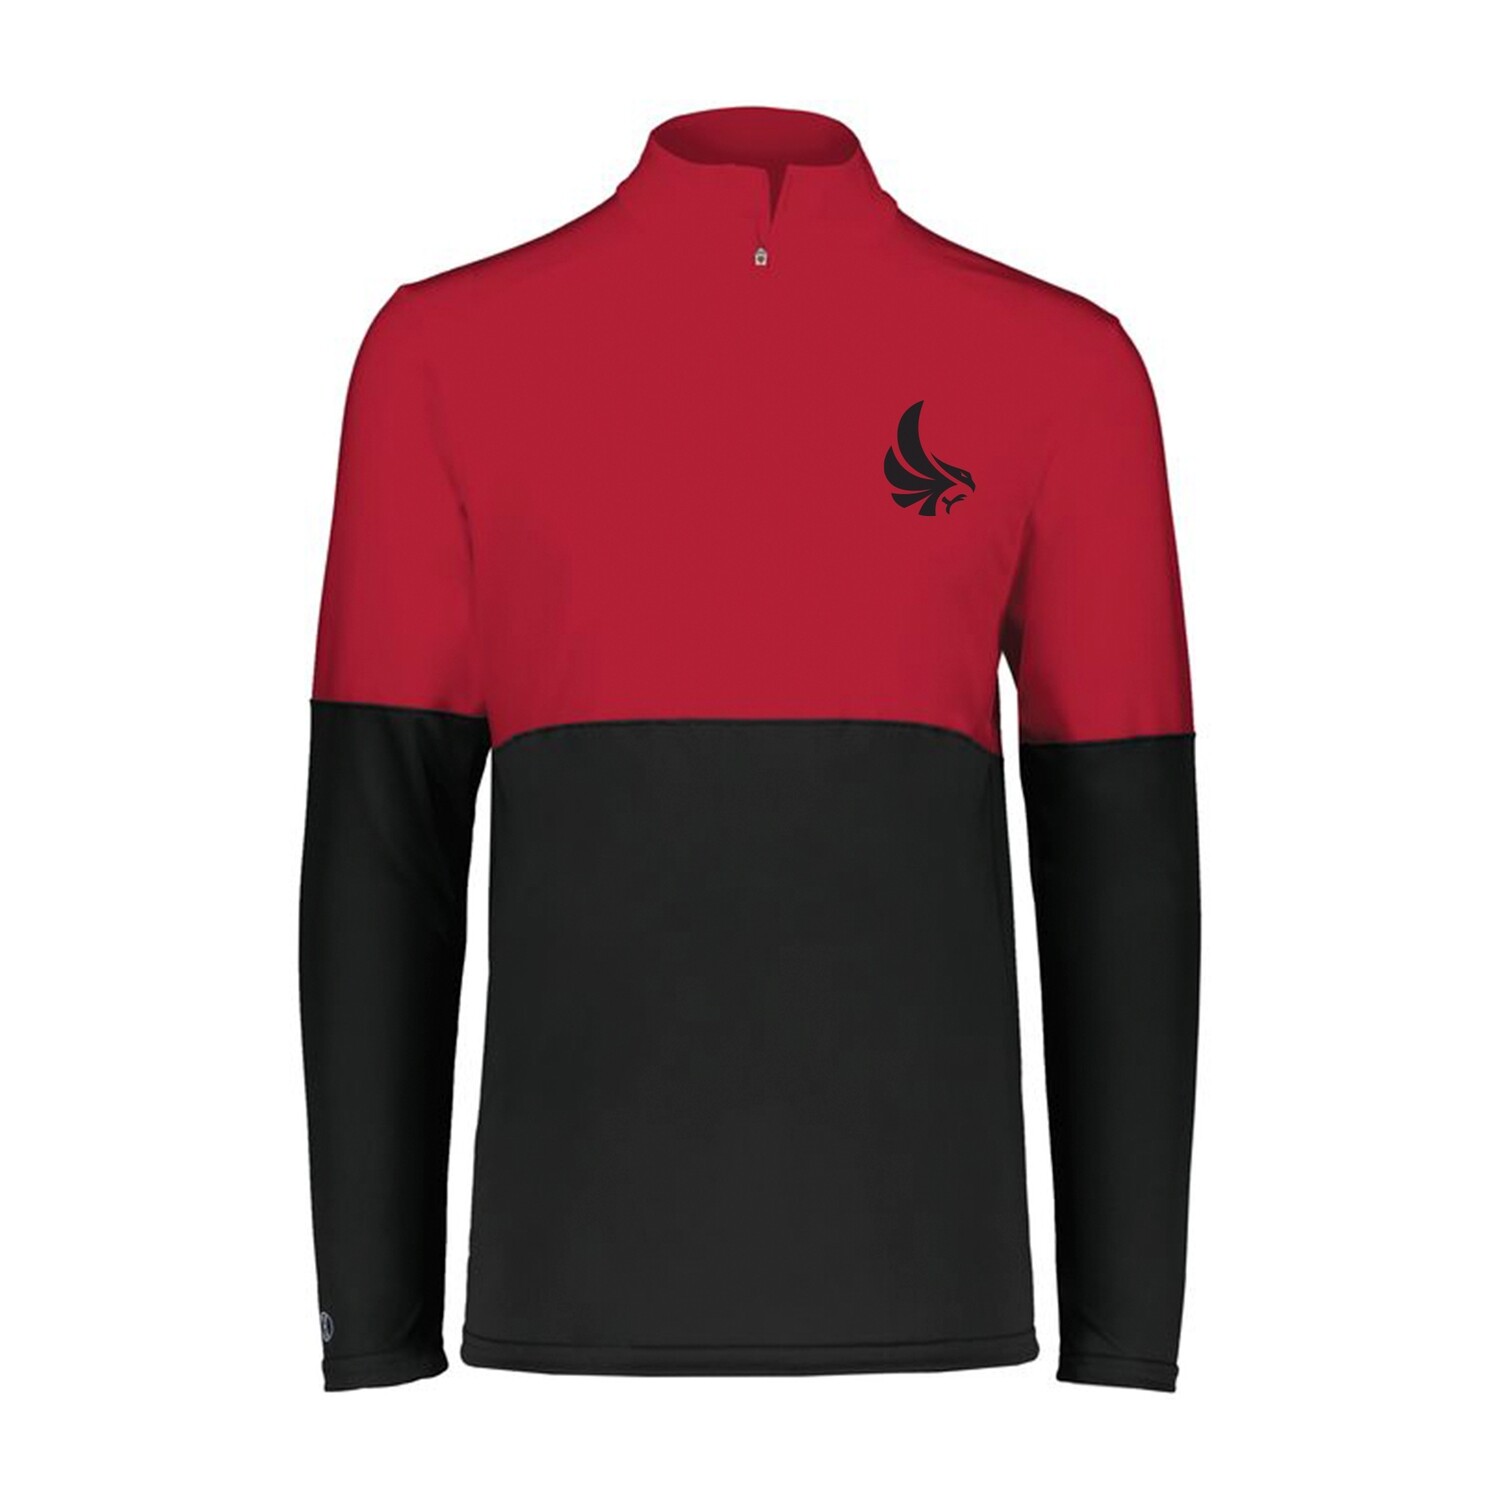 1/4 ZIP PULLOVER - RED/BLACK, SIZE: SMALL